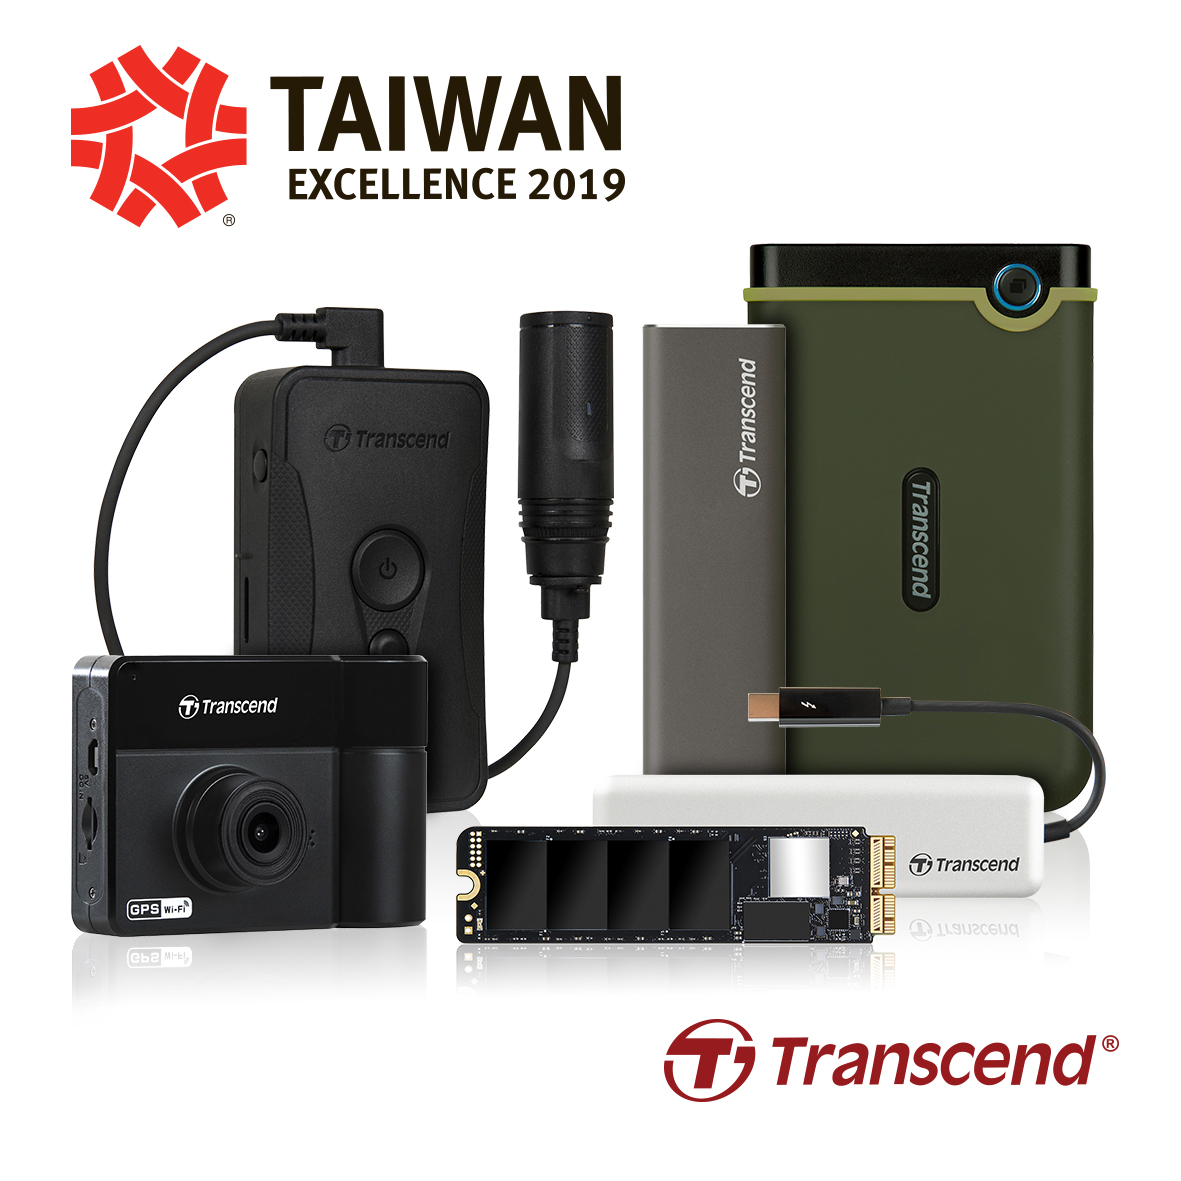 Transcend Is Honored with Five Taiwan Excellence Awards 2019